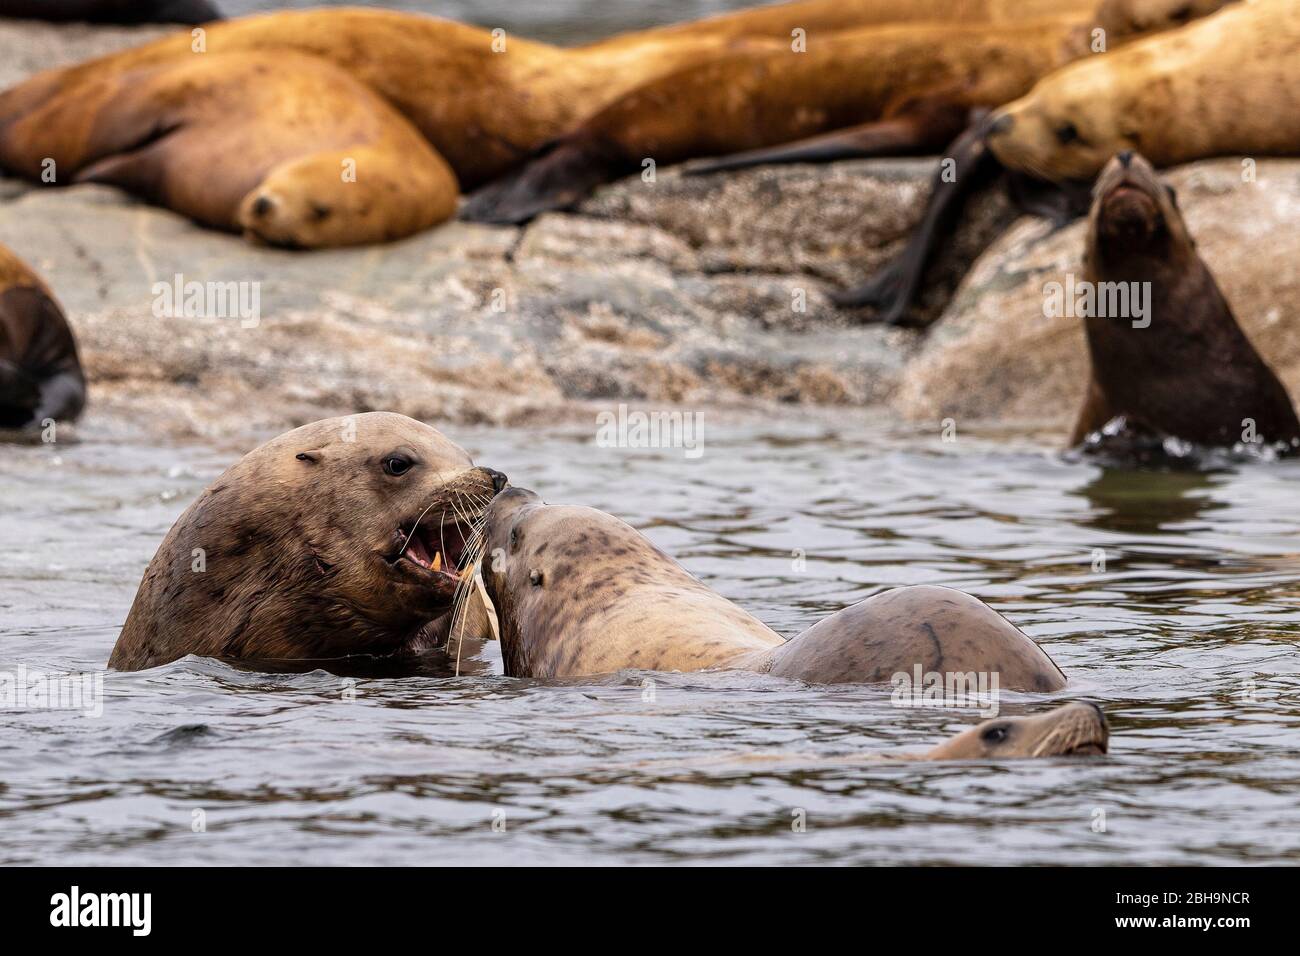 Steller Sea Lions on the Great Bear Rainforest Coast, British Columbia Coast, First Nations Territory, Canada Stock Photo